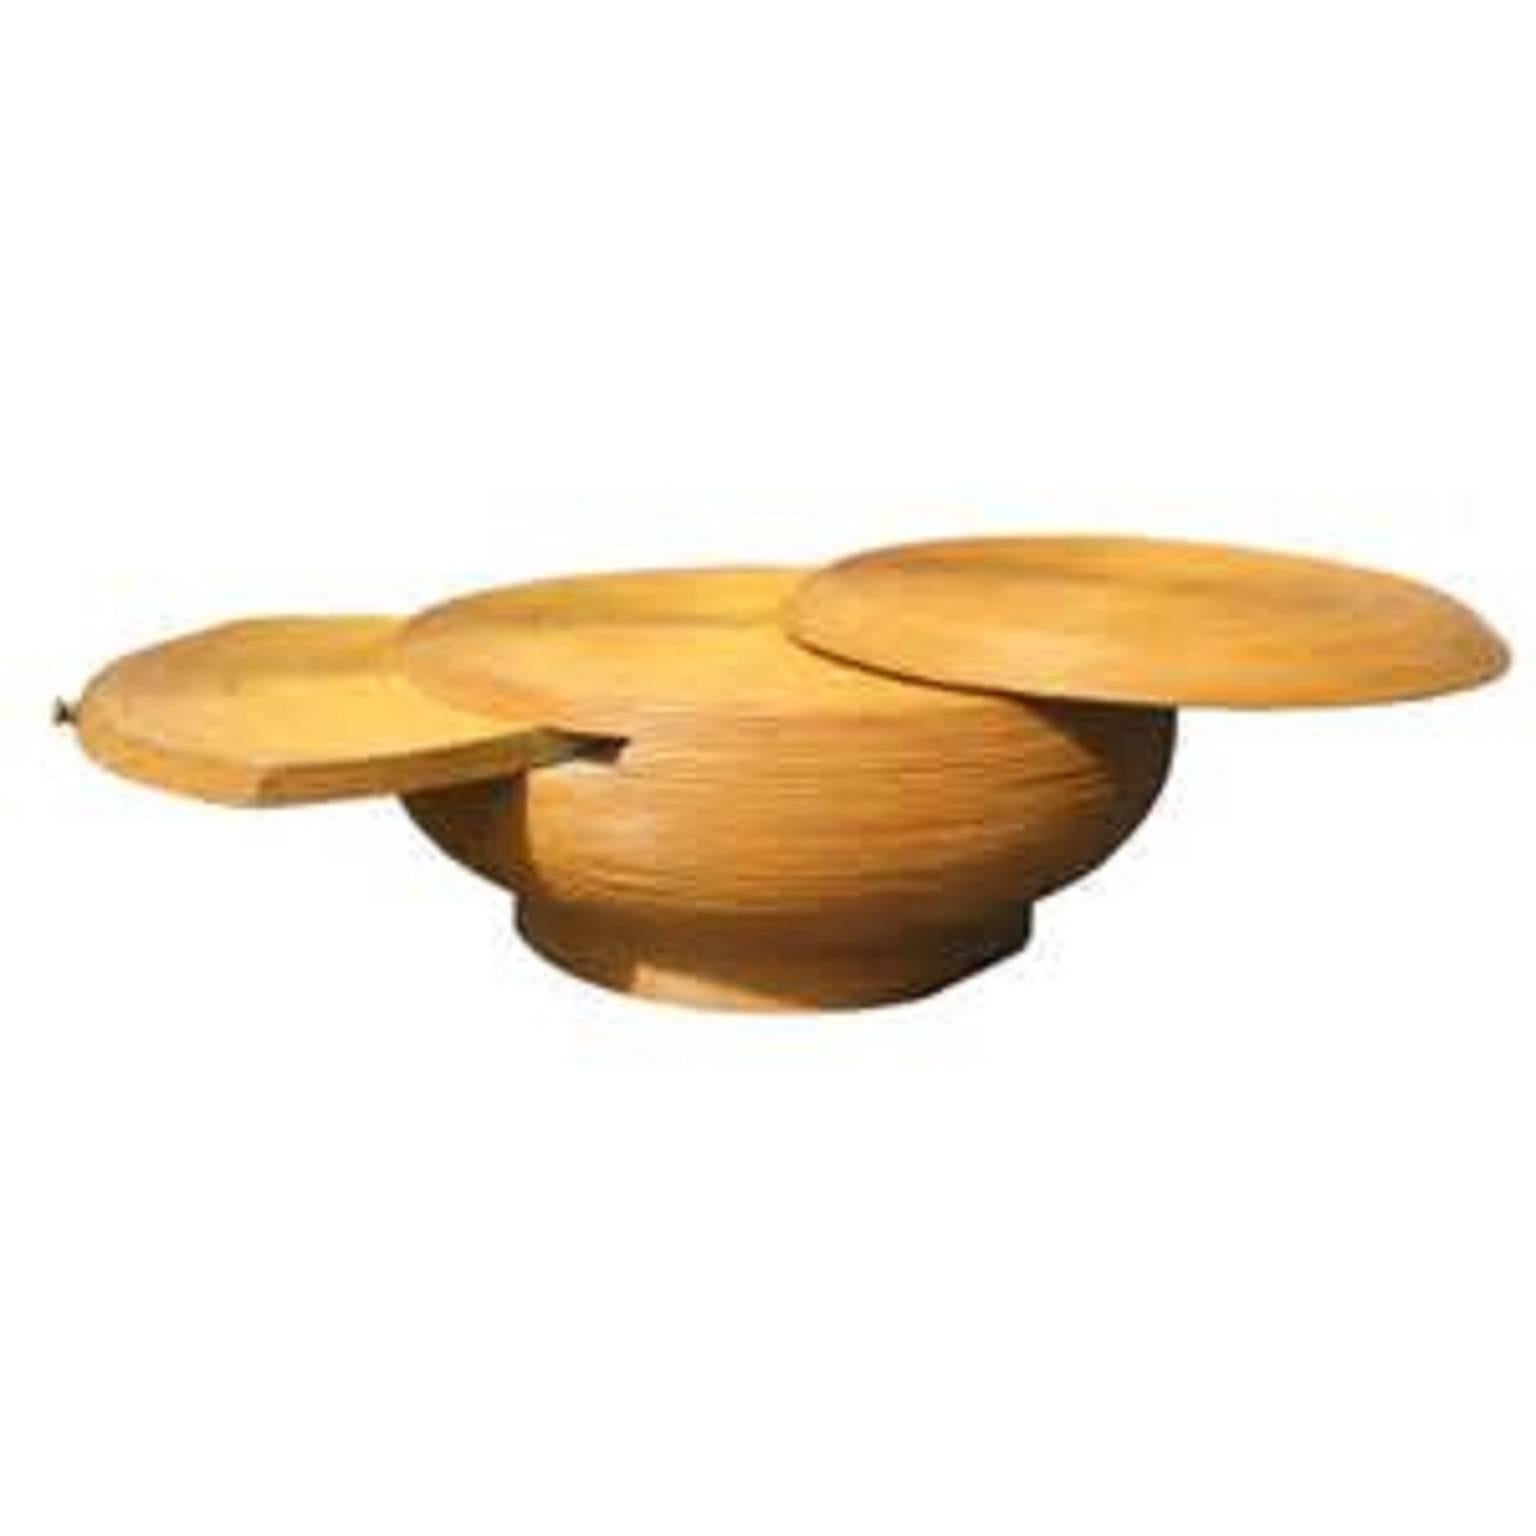 pencil reed coffee table